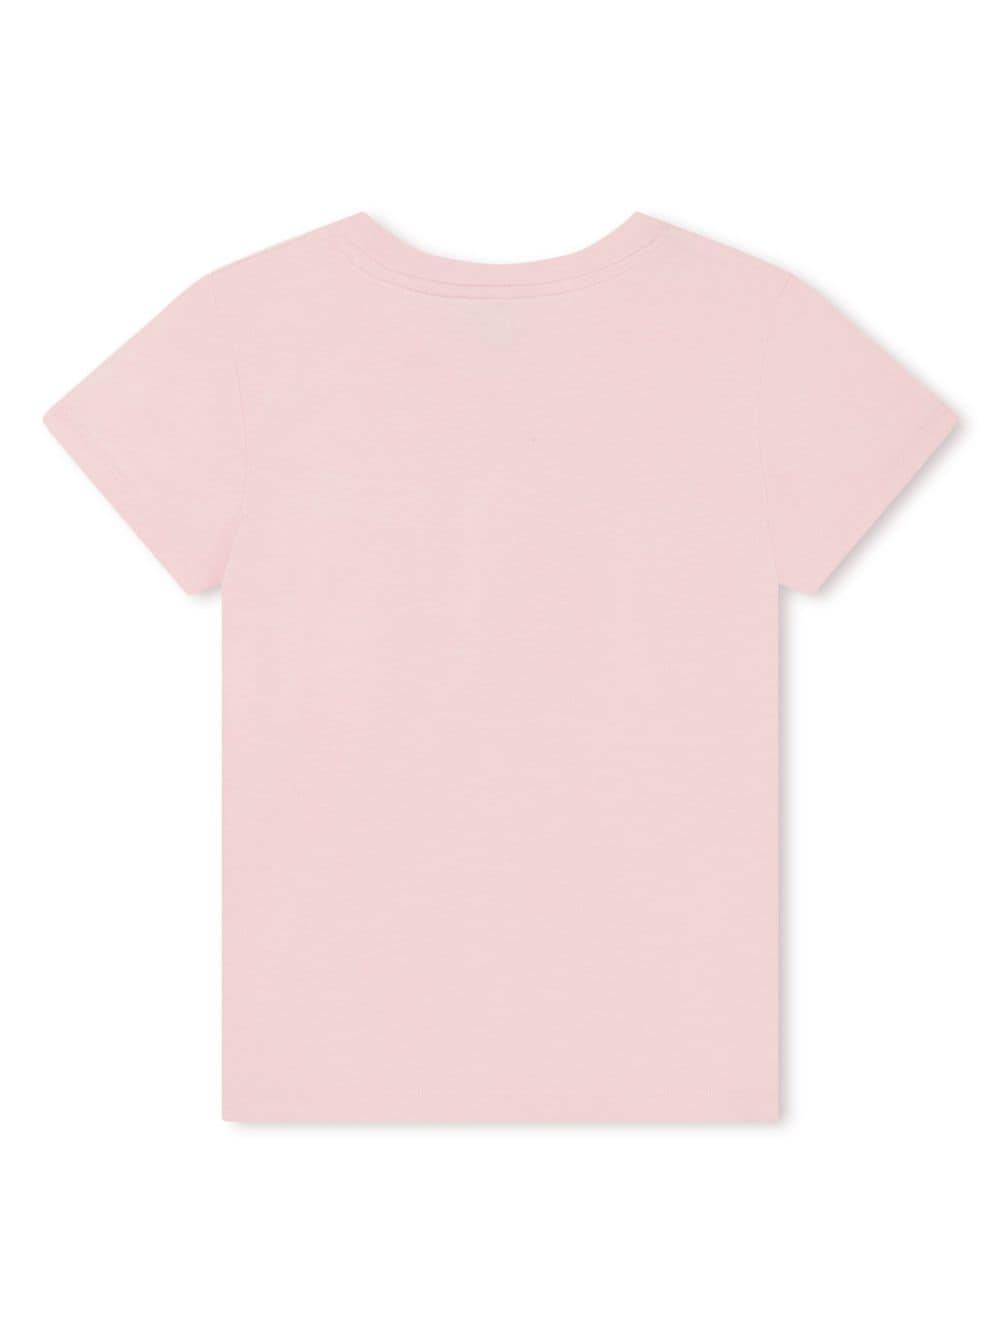 Pink t-shirt for girls with gold logo